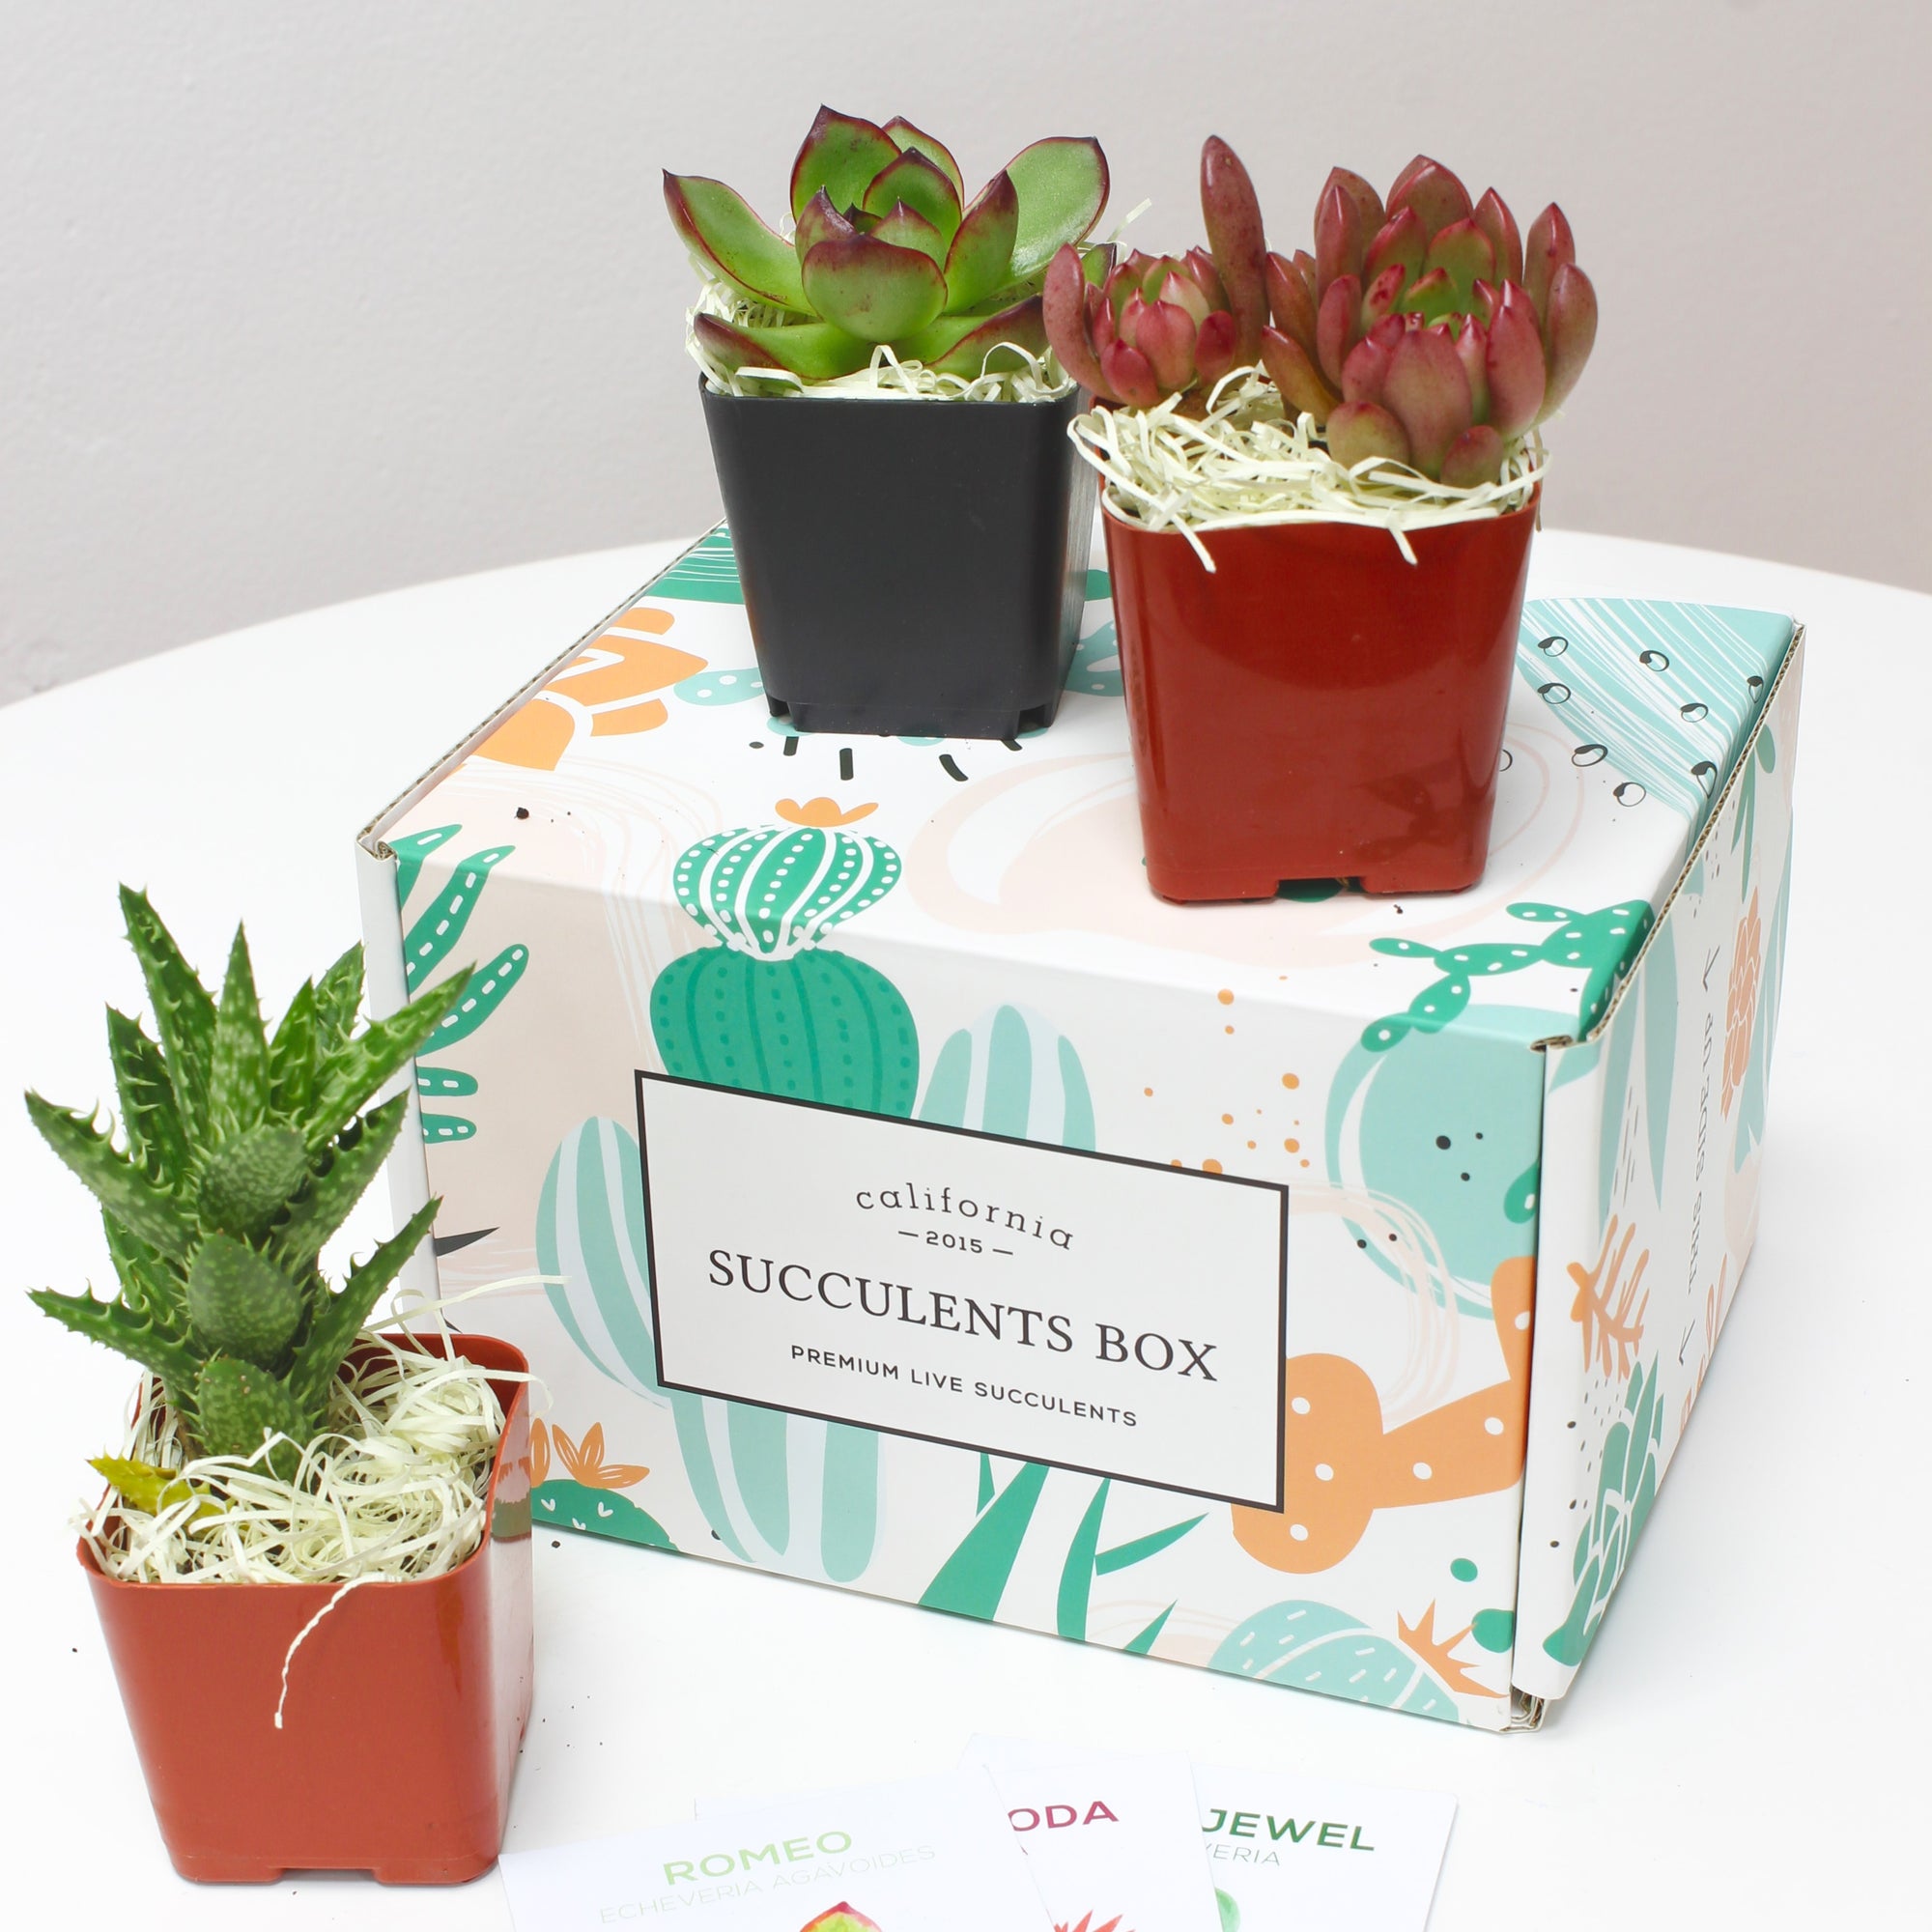 Succulent Subscription Boxes, Succulents Box, Types of Succulent Plants, Succulents for Sale, Succulents in California, Succulents Box with Care Guide